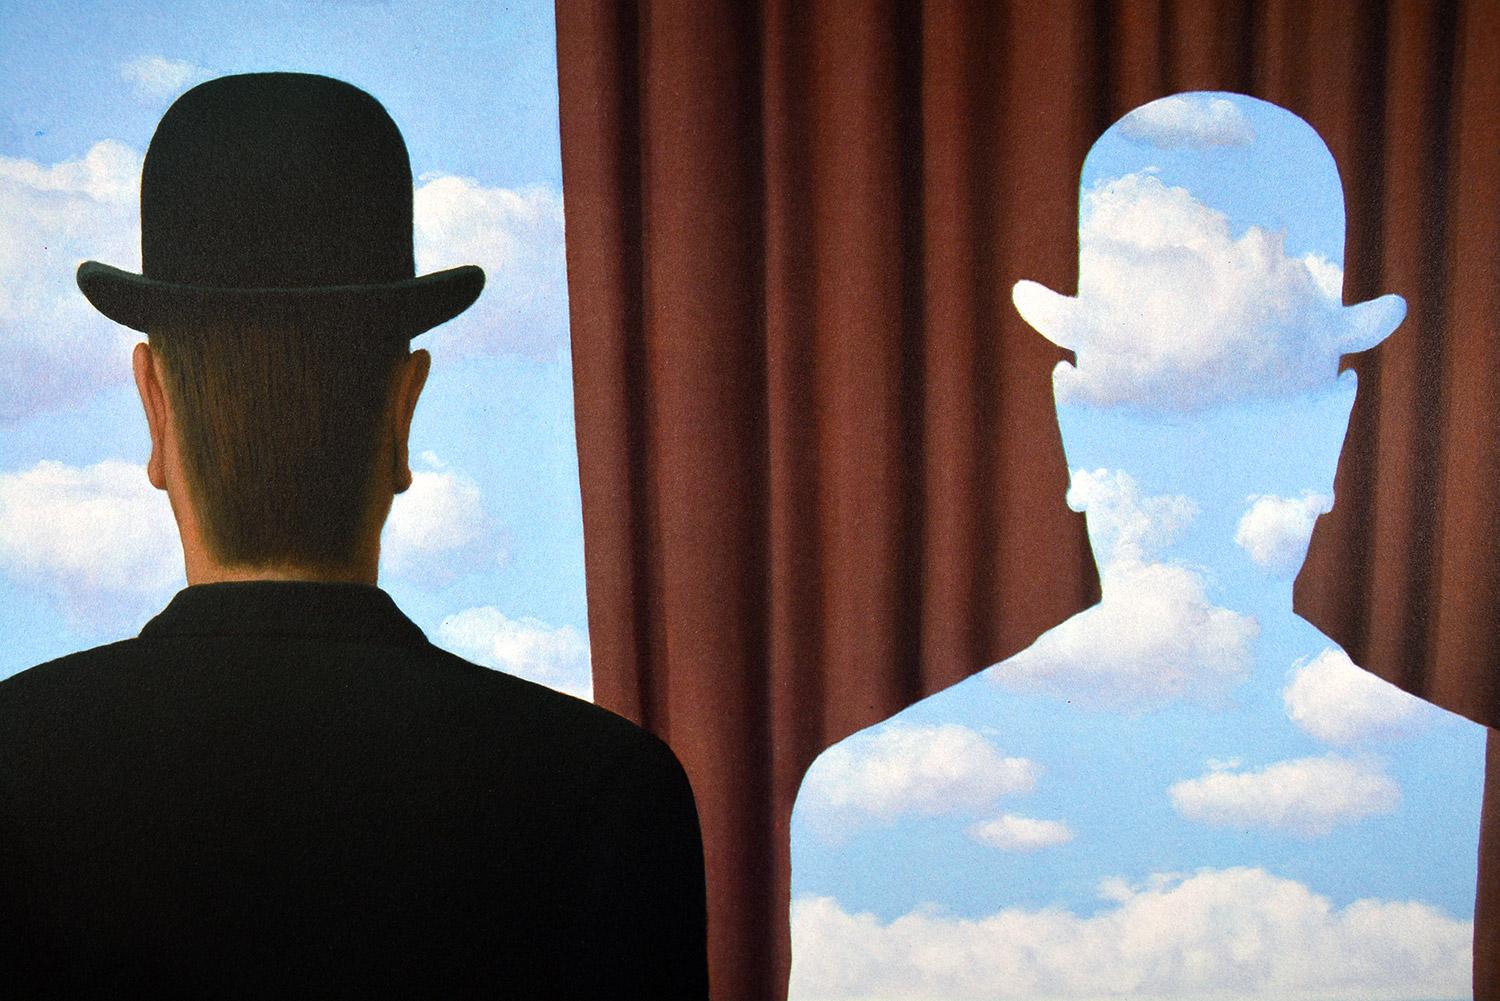 René Magritte - DÉCALCOMANIE, 1966 Limited ed. Lithograph. Surrealism French - Surrealist Print by (after) René Magritte